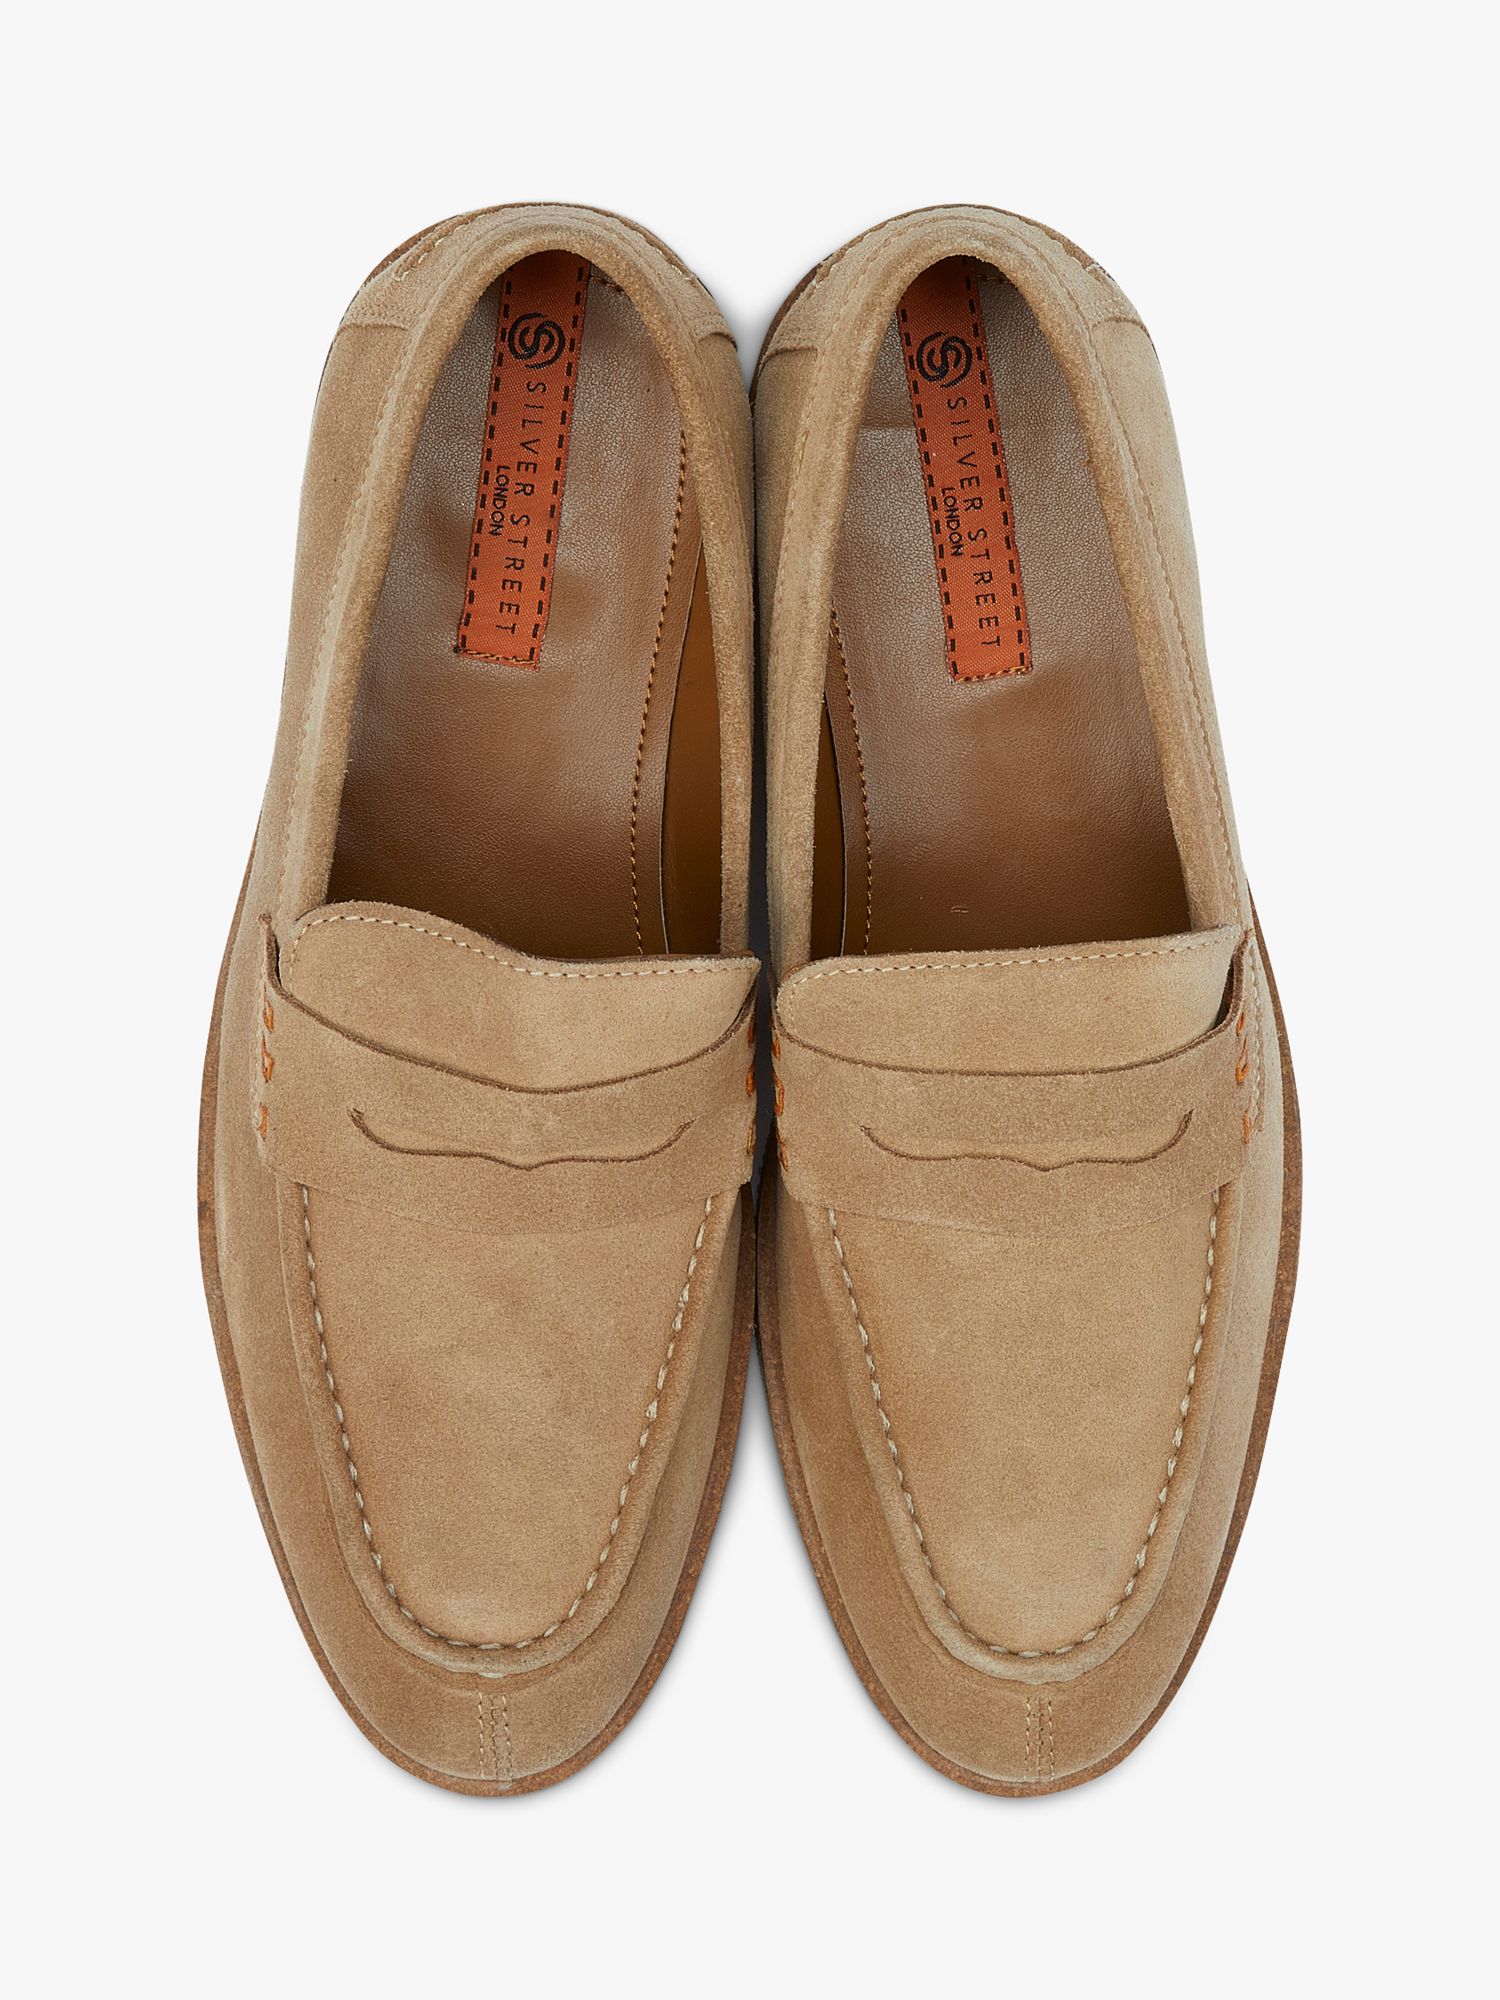 Buy Silver Street London Morgan Suede Loafers Online at johnlewis.com